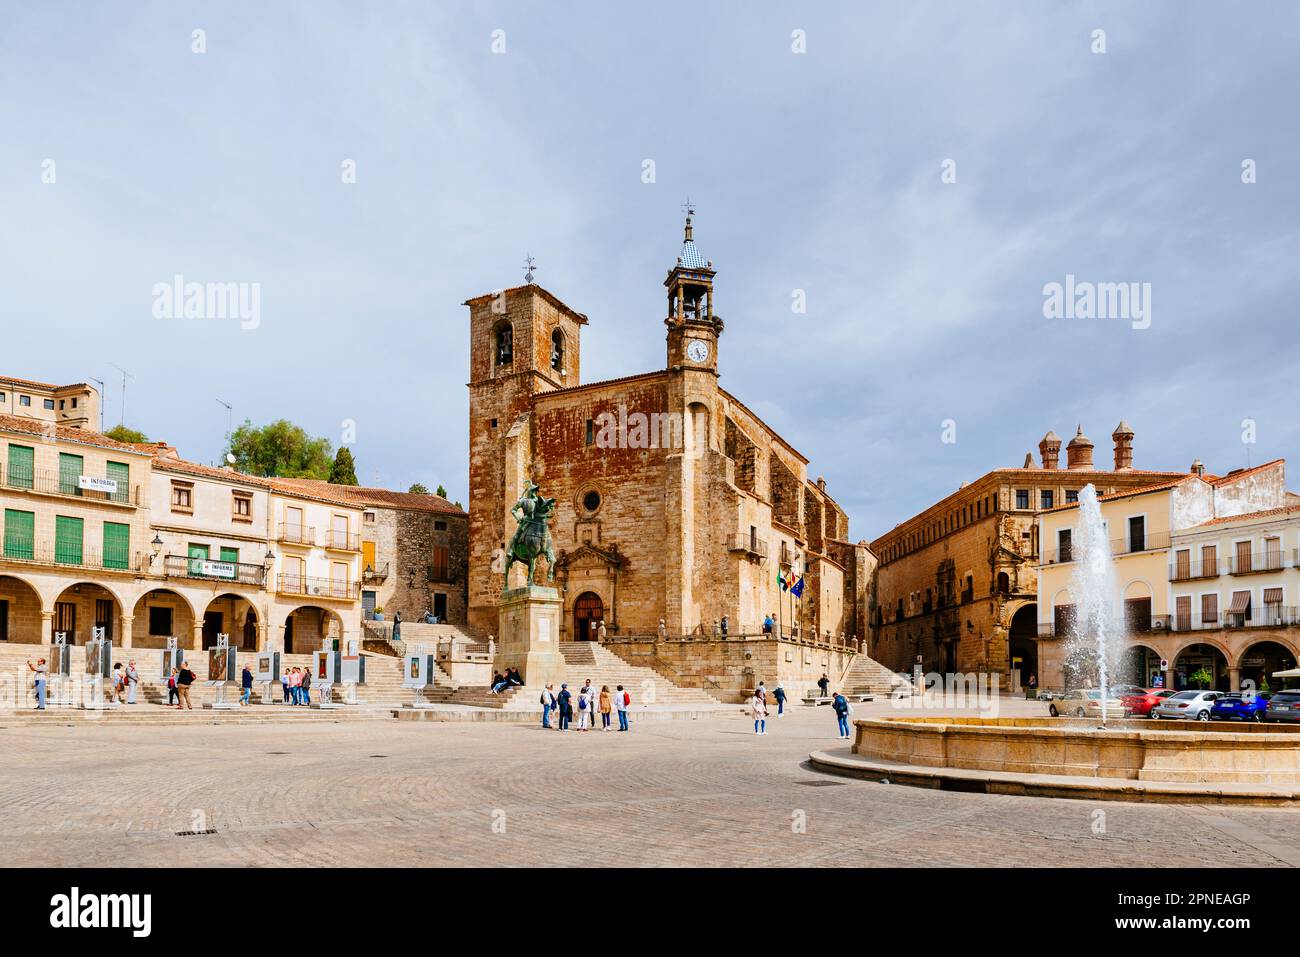 Panoramic view of Plaza Mayor, with San Martin church (C) arcaded houses (L) and Palace of Carvajal Vargas or of the Dukes of San Carlos (R). Trujillo Stock Photo